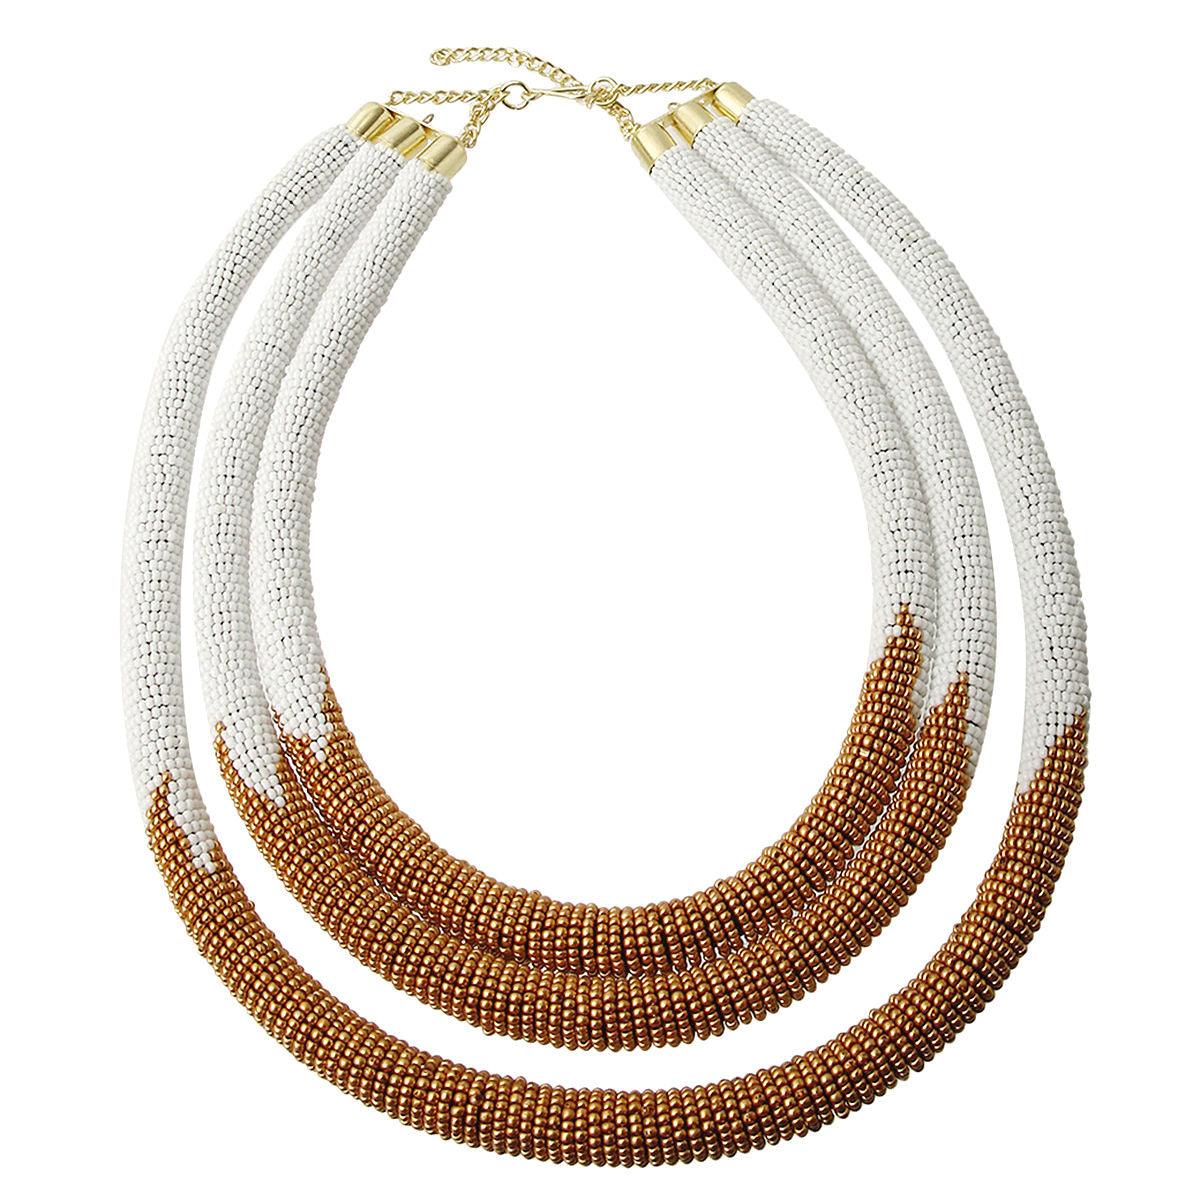 Top Pick: White & Gold Beaded Rope Necklace, Triple Layered